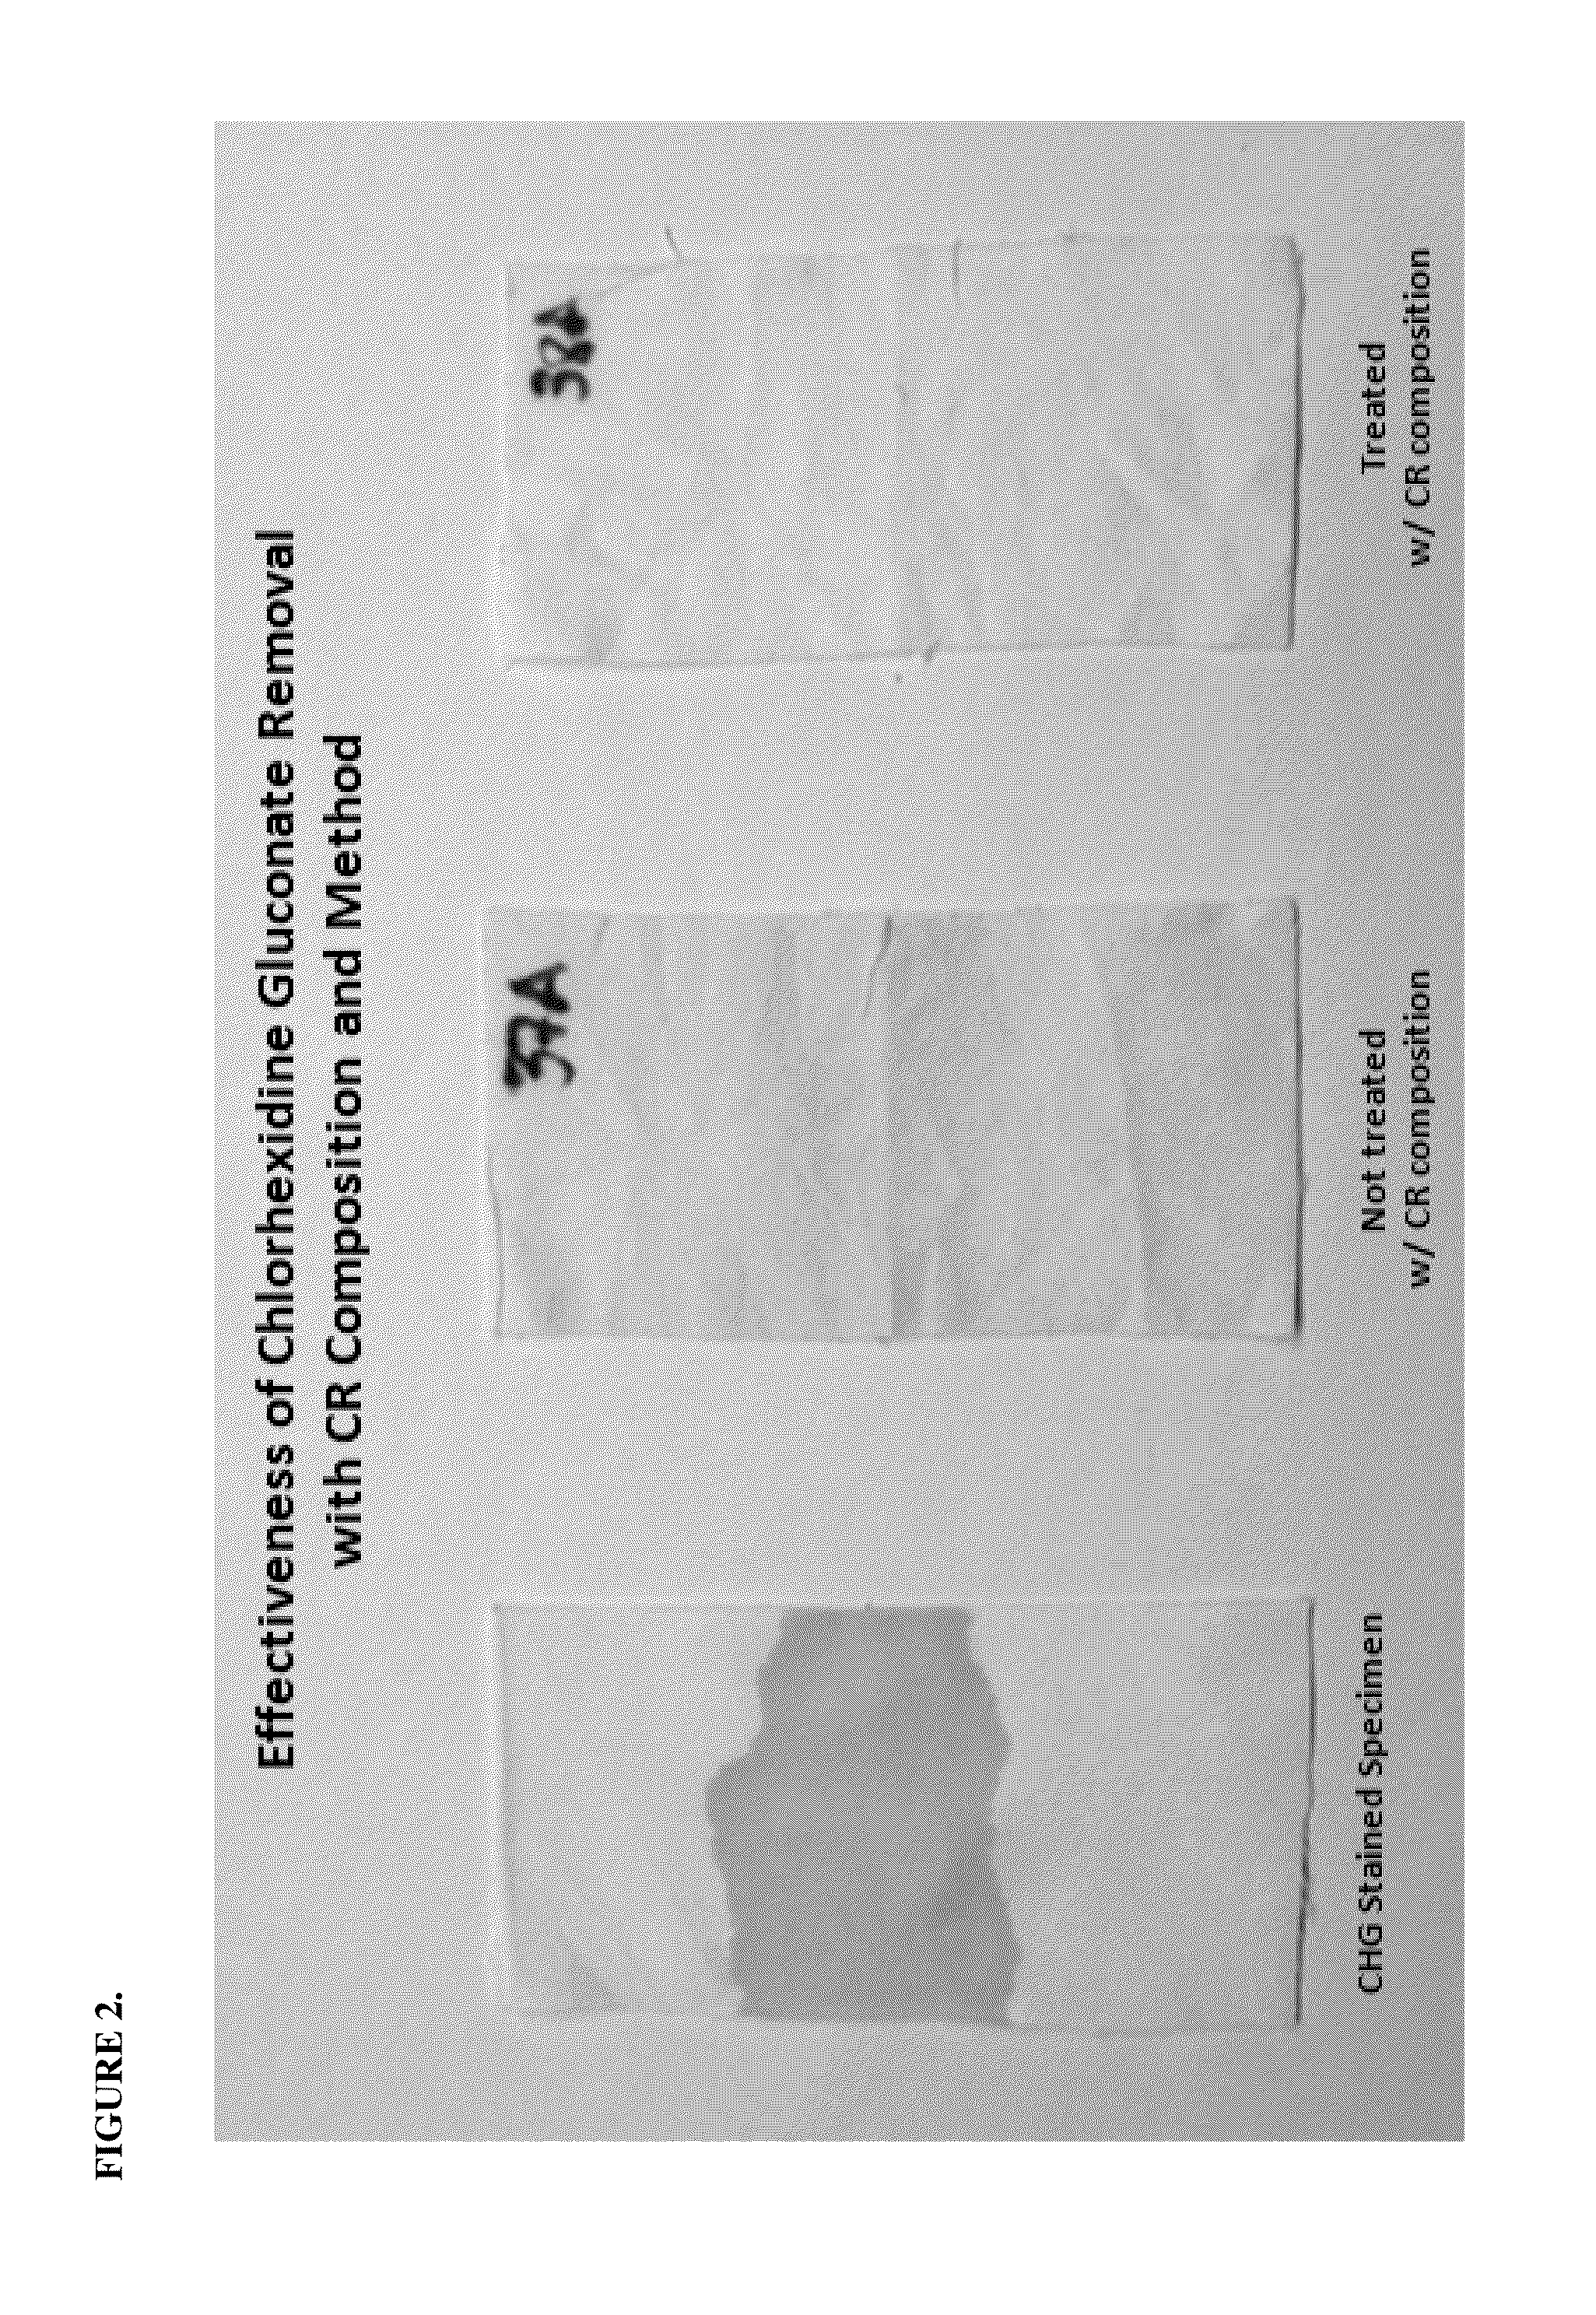 Composition and method for removing stains derived from chlorhexidine gluconate